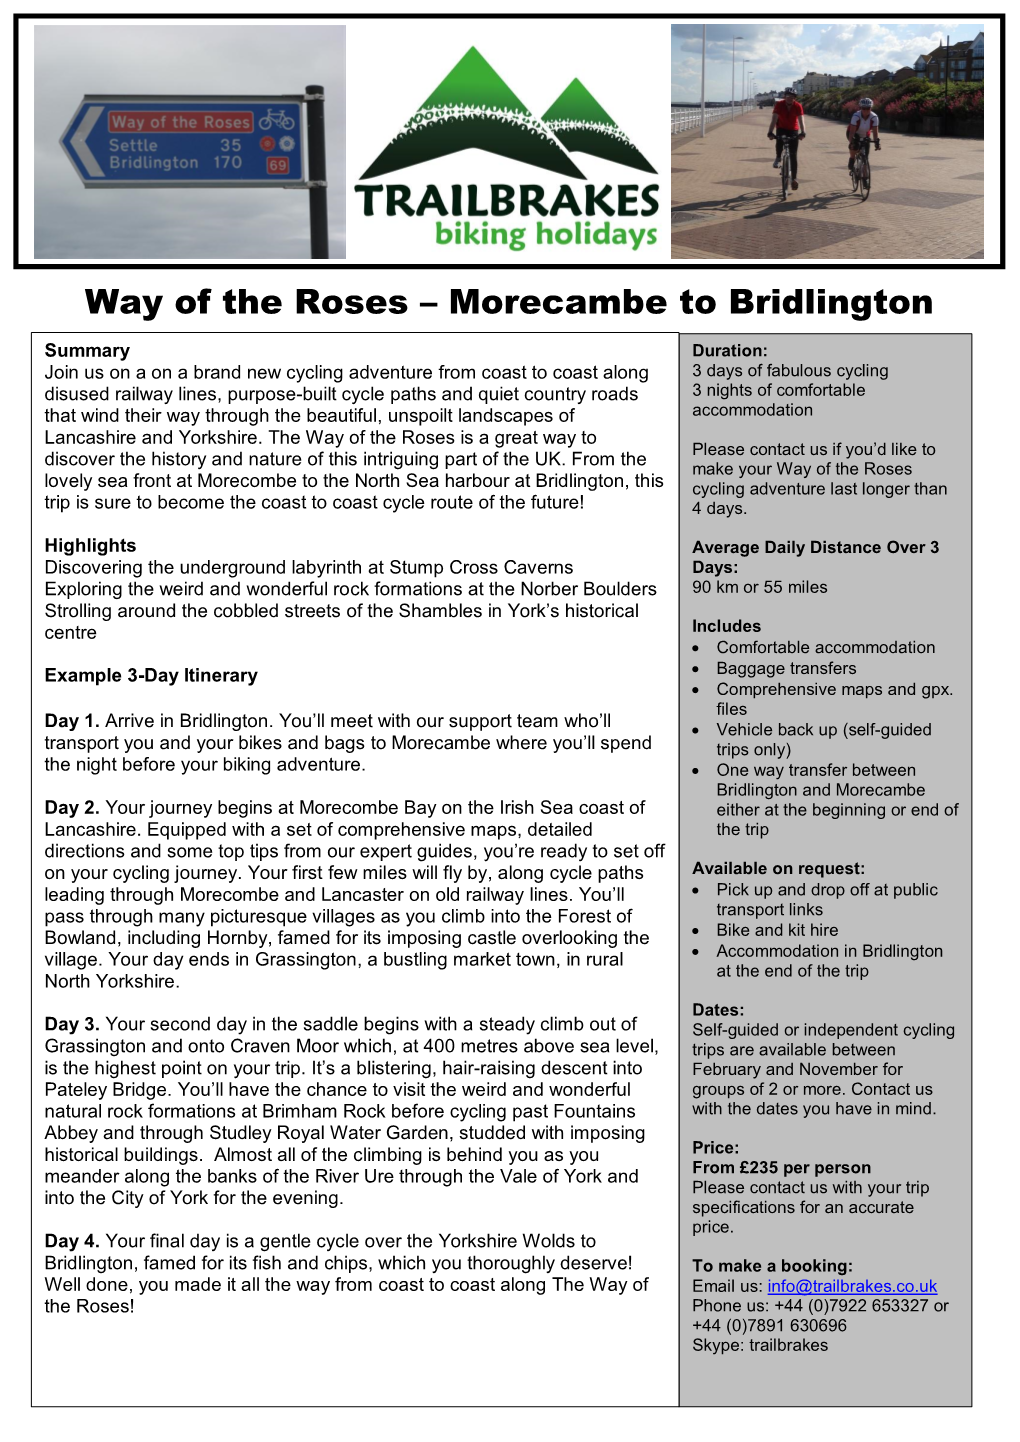 Way of the Roses – Morecambe to Bridlington 7 Stanes Skills Weekend